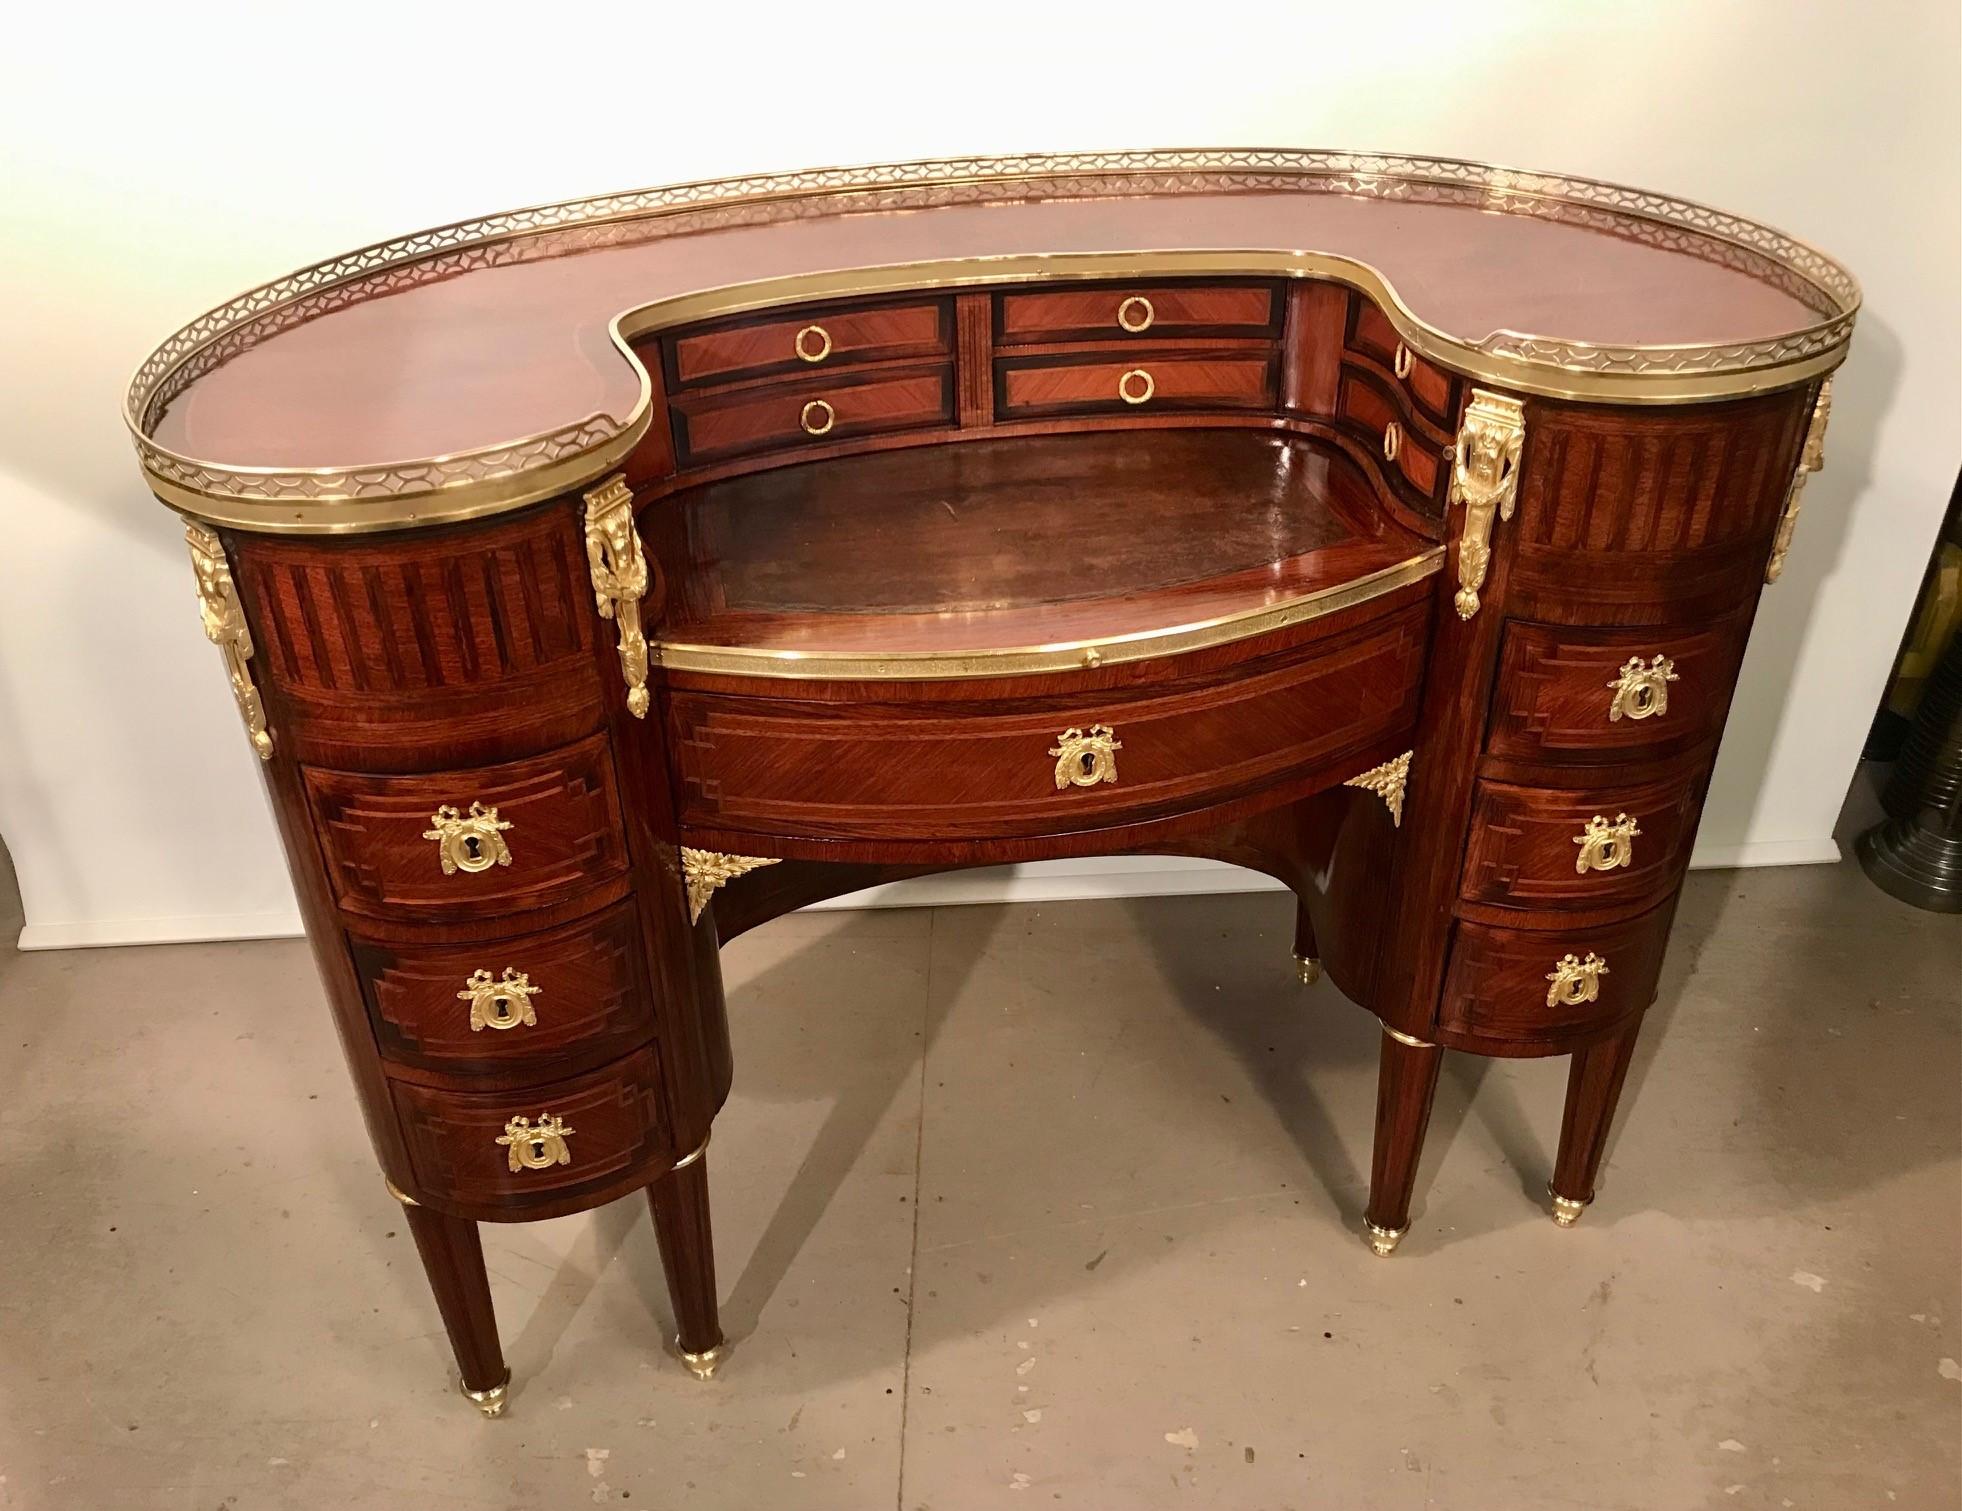 Antique French Louis XVI Style Mahogany and Parquetry Bureau a Rognon In Good Condition For Sale In Montreal, QC